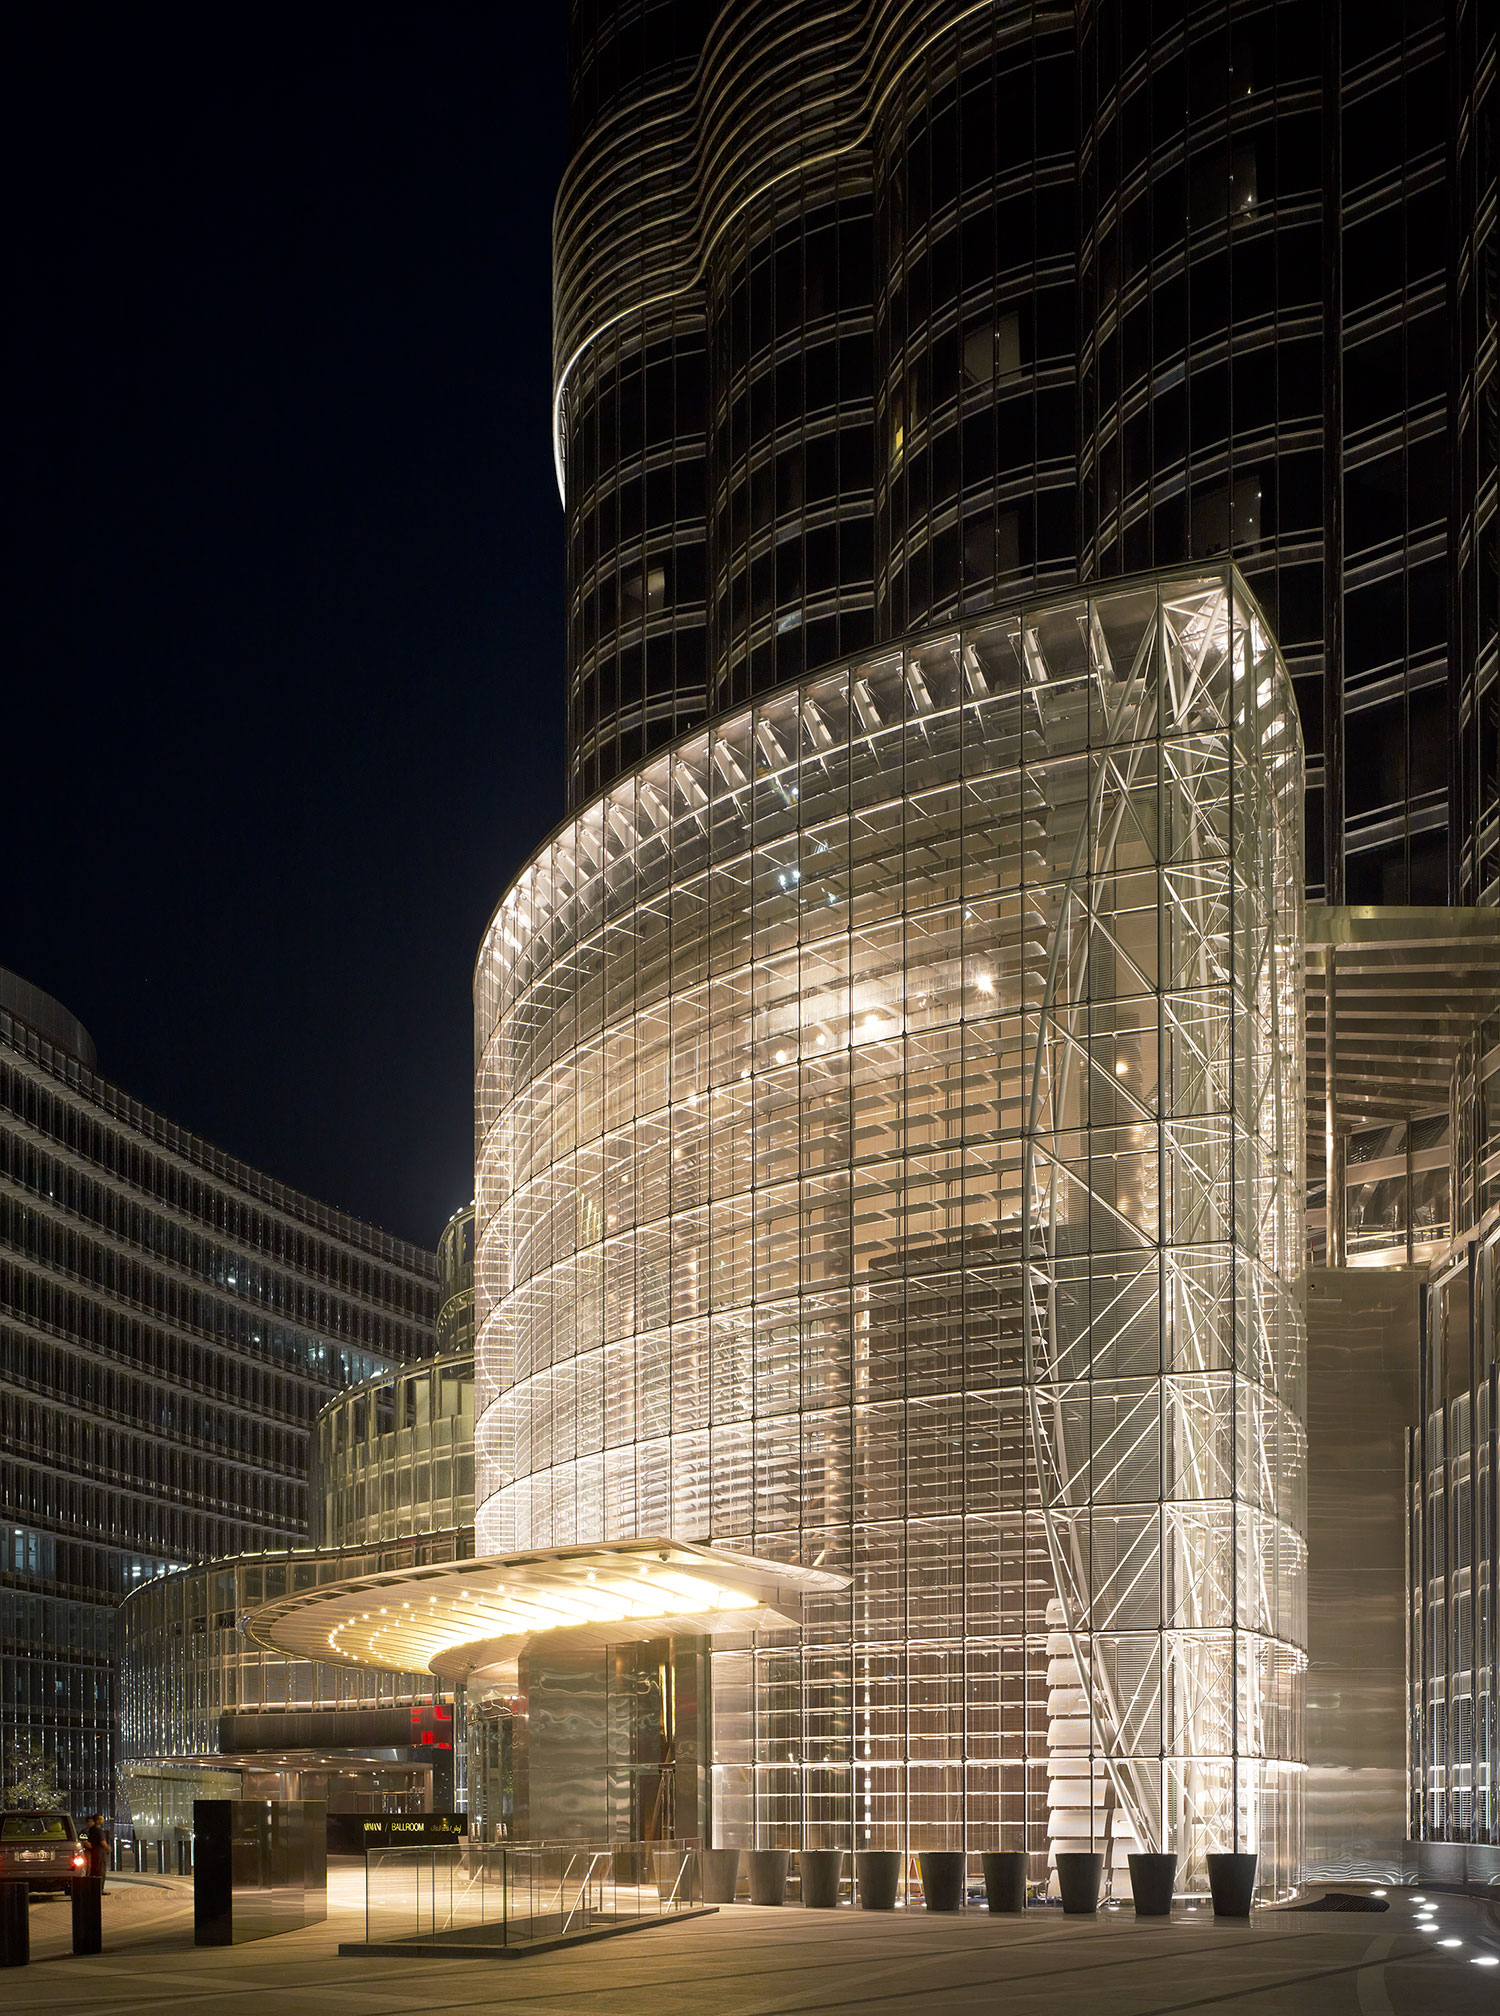 Exterior view of the Armani hotel entrance with glass curtain wall (evening)